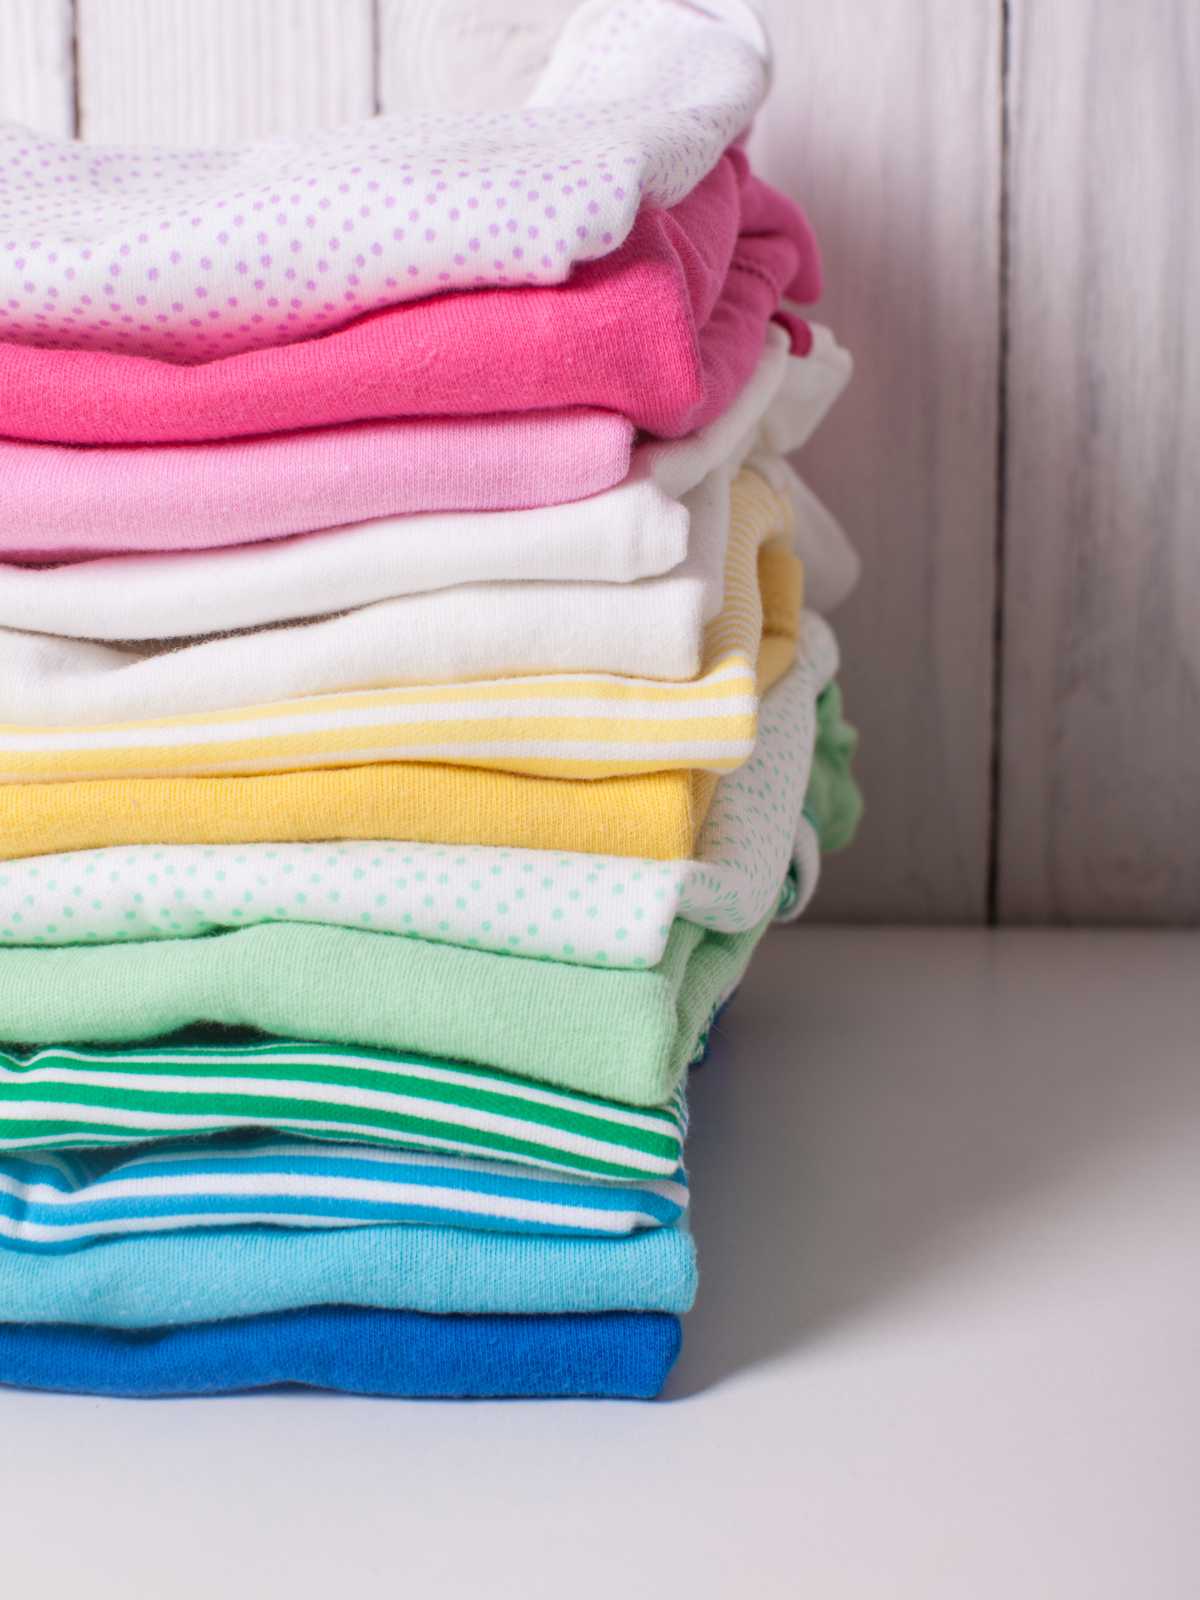 How Do You Get Colour Stains Out Of Baby Clothes?